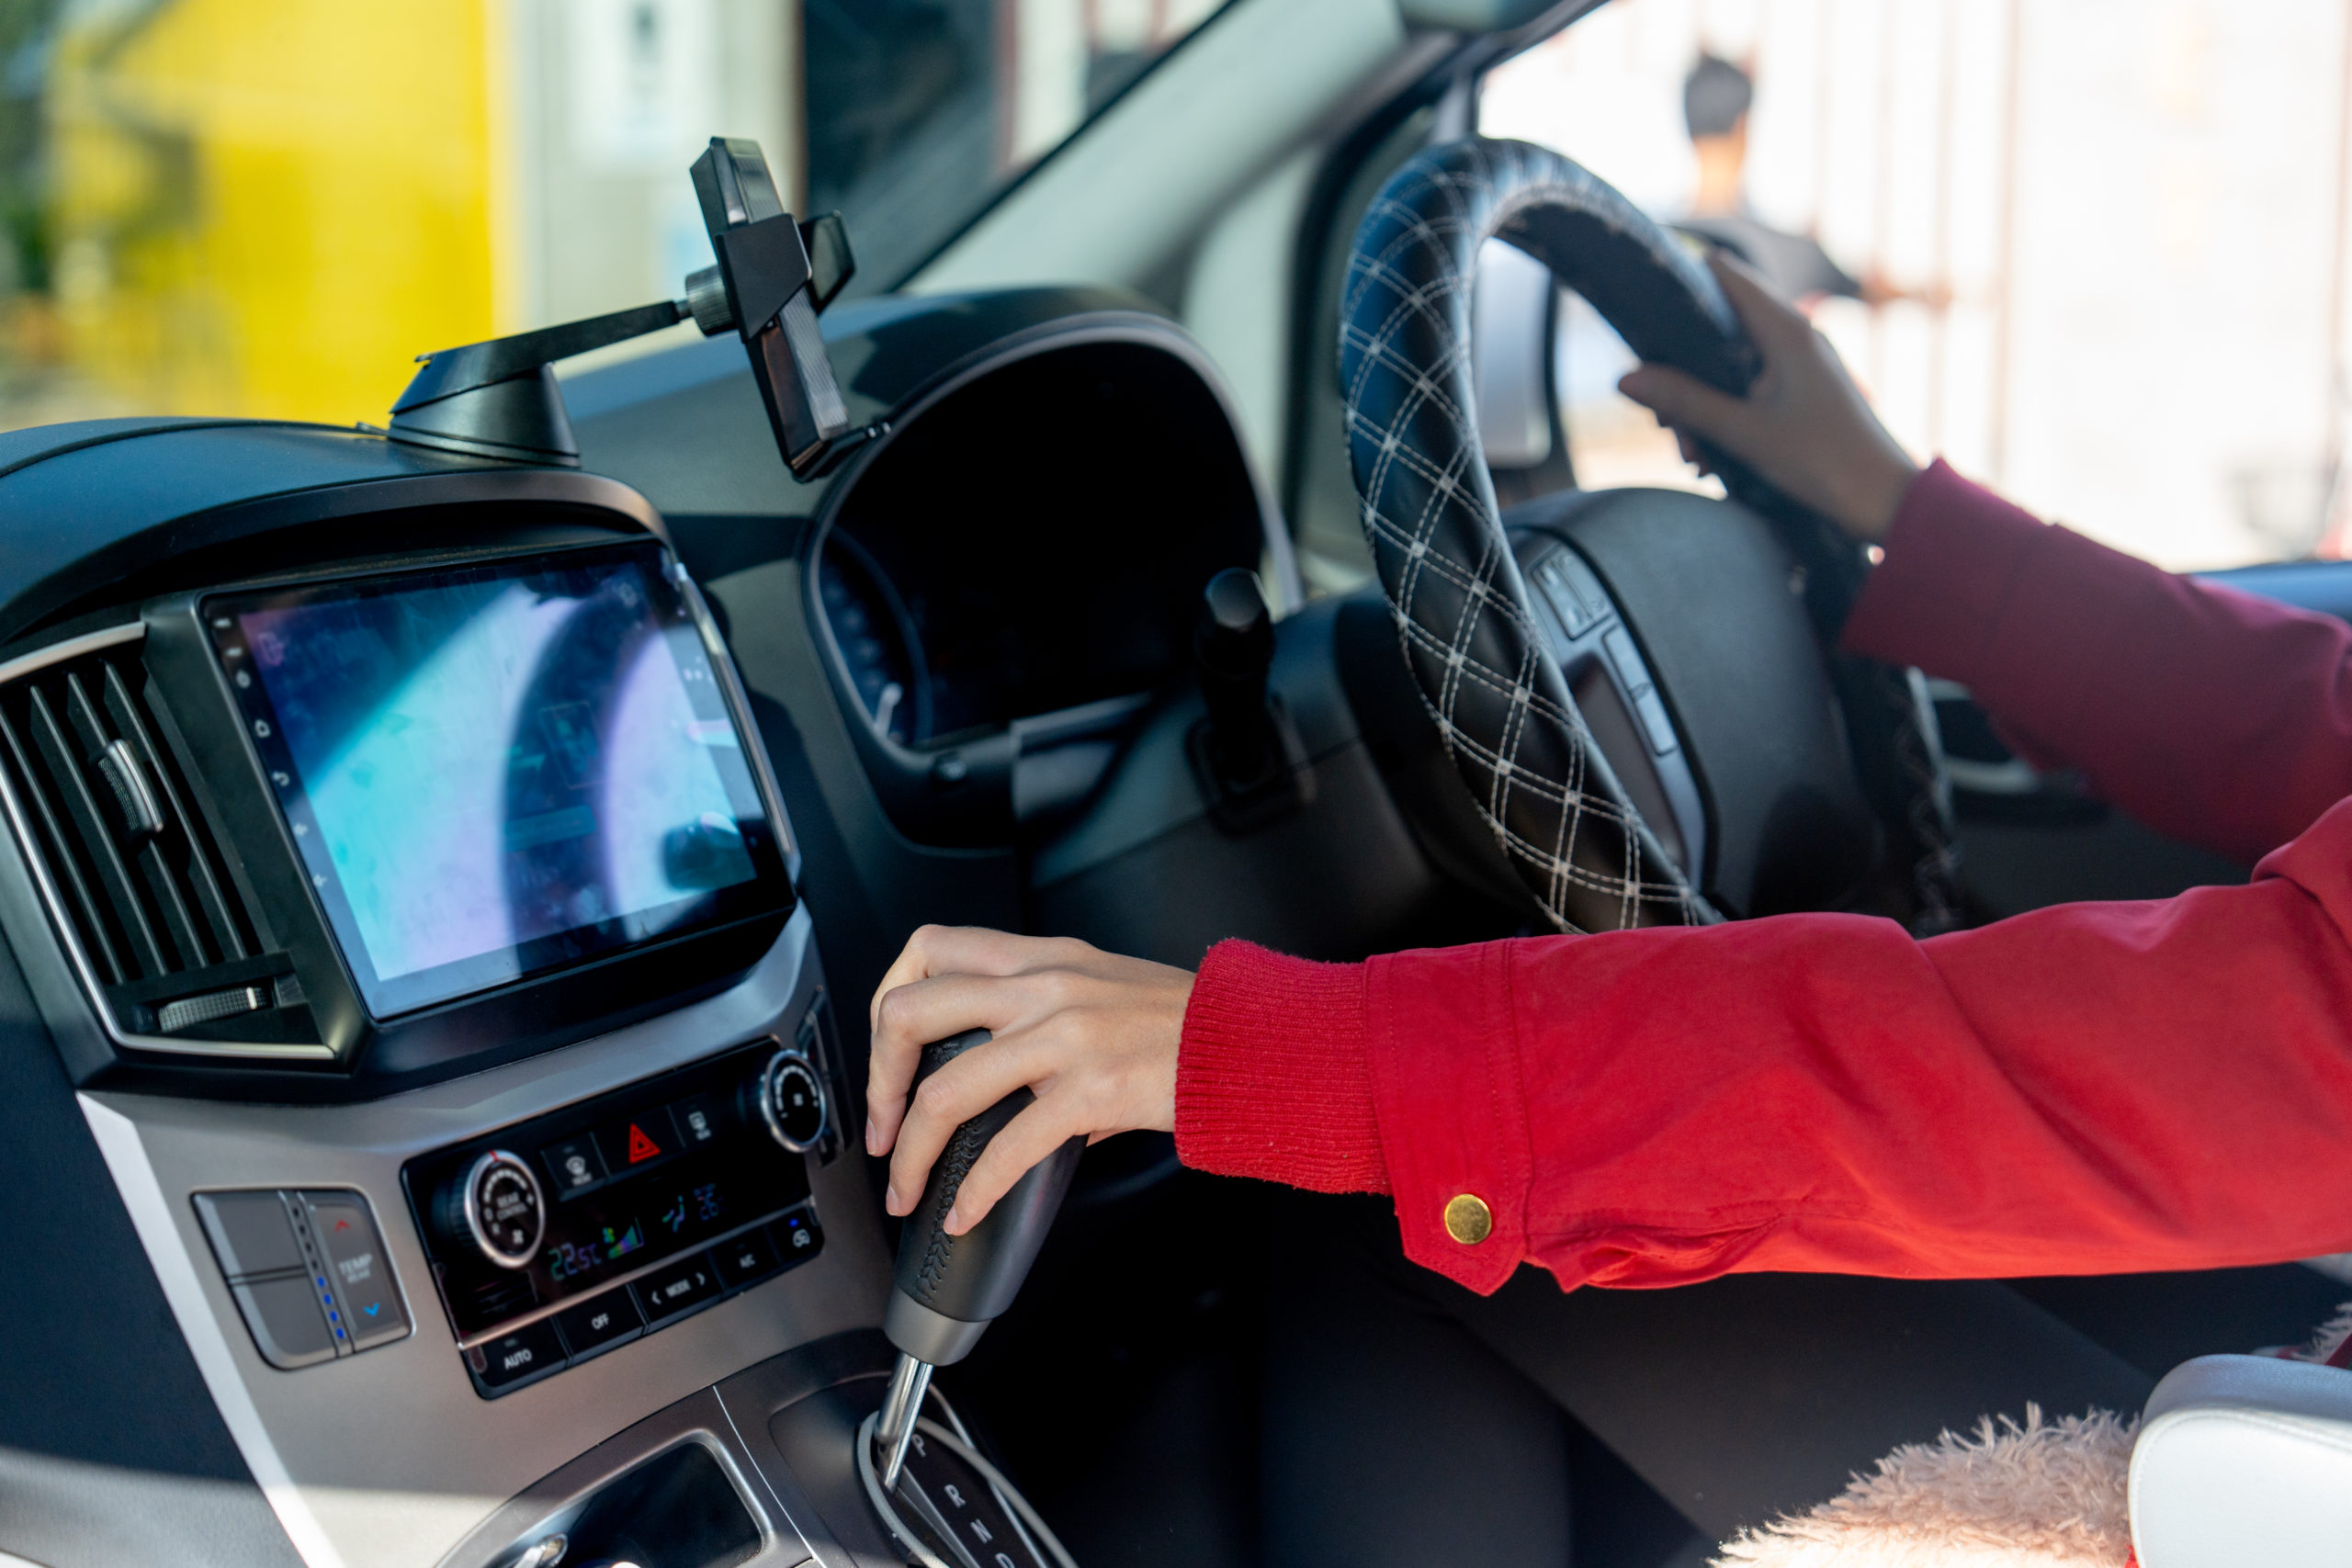 https://autolab.com.co/wp-content/uploads/close-up-hands-of-woman-hold-joystick-or-steering-2023-12-06-22-19-51-utc-scaled.jpg